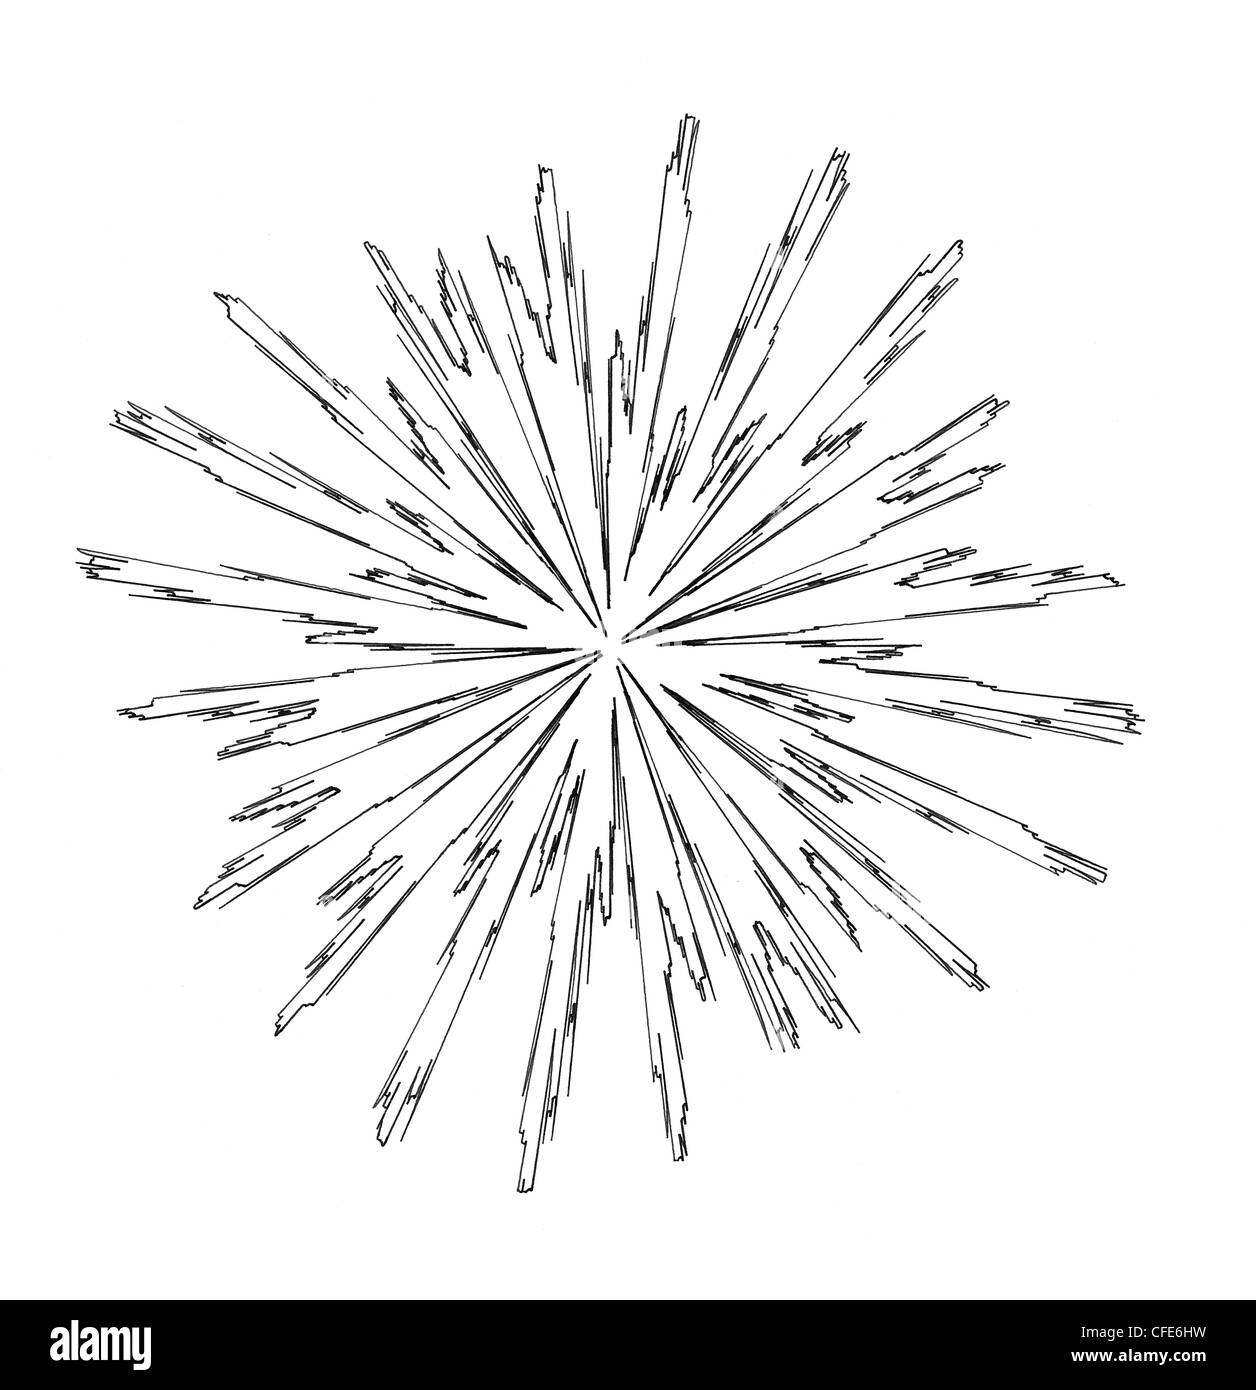 Circular based drawing where the loops are drawn with varying size and programmed to have a jagged effect. Stock Photo